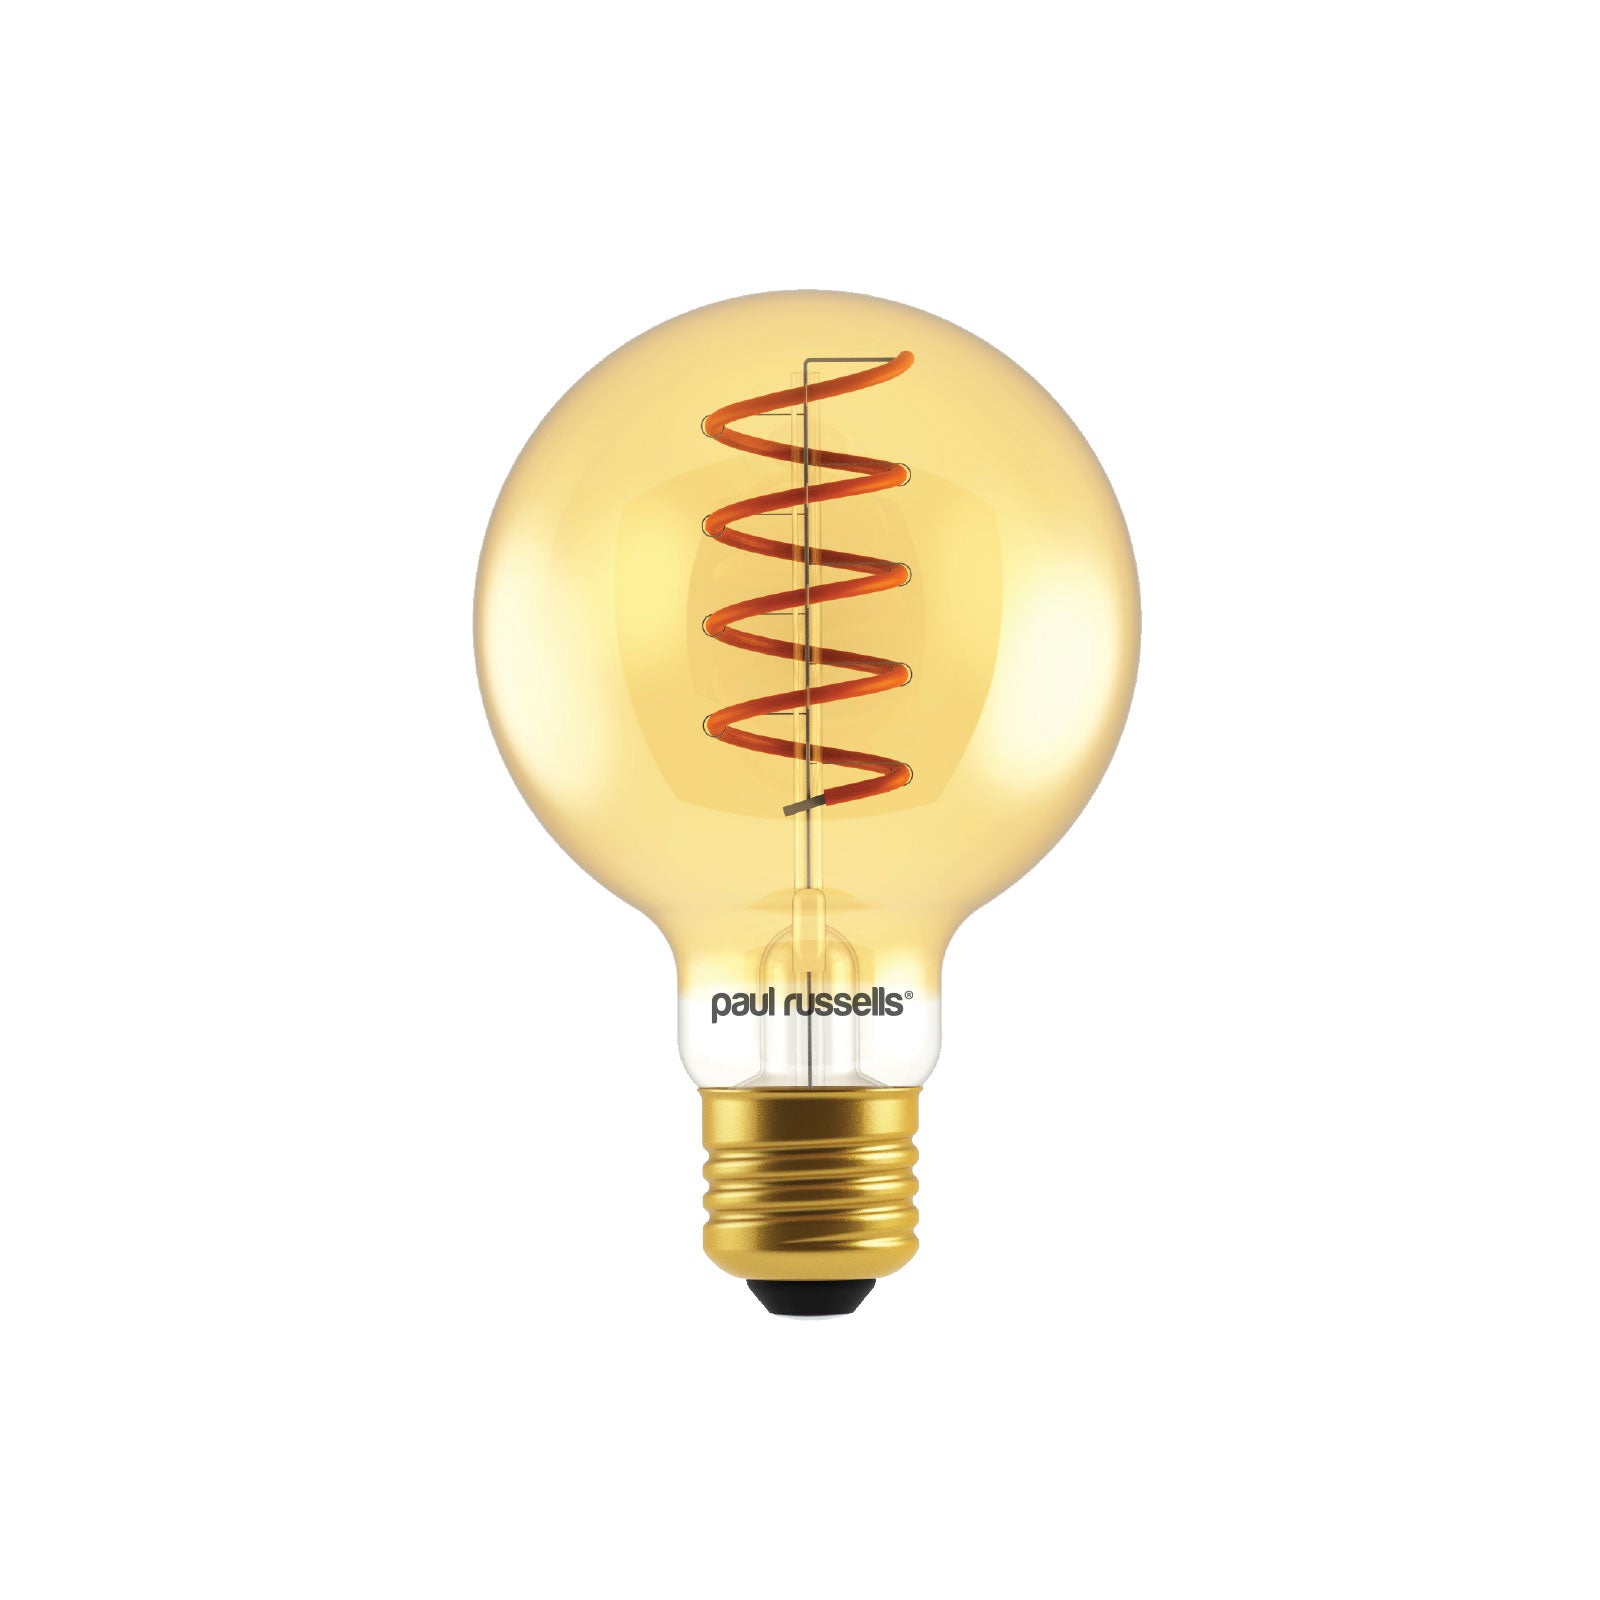 LED Filament Spiral G80 4W=25w (AMBER) E27 Extra Warm ES russells Edison paul – White